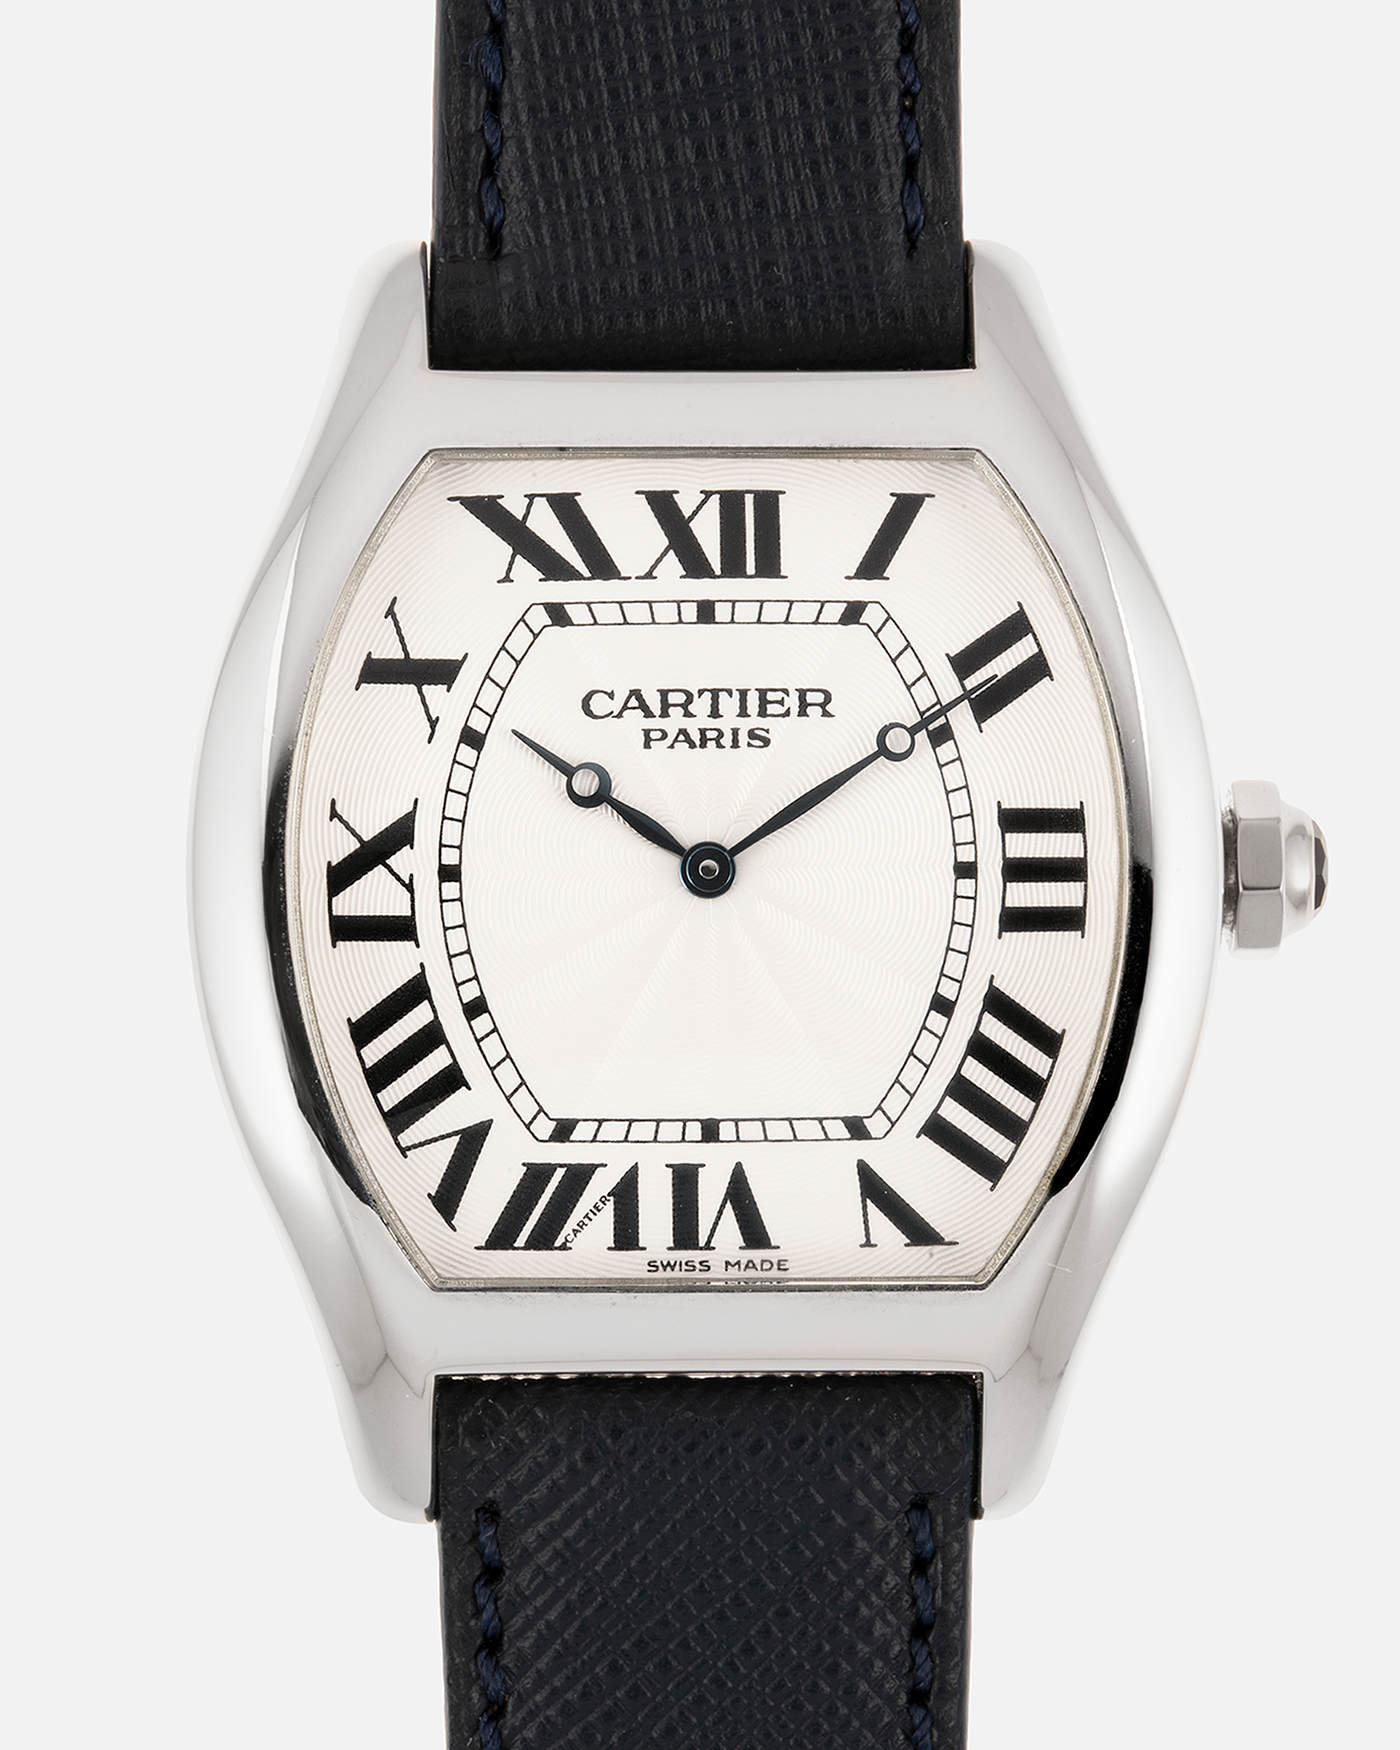 Brand: Cartier Year: 2011 Model: CPCP Collection Prive Tortue XL Reference: 2764 Material: Platinum Movement: Cartier Jaeger LeCoultre 9601MC Case Diameter: 48mm X 38mm including lugs Strap: Navy Blue Molequin Textured Calf Strap with 18k White Gold Deployant